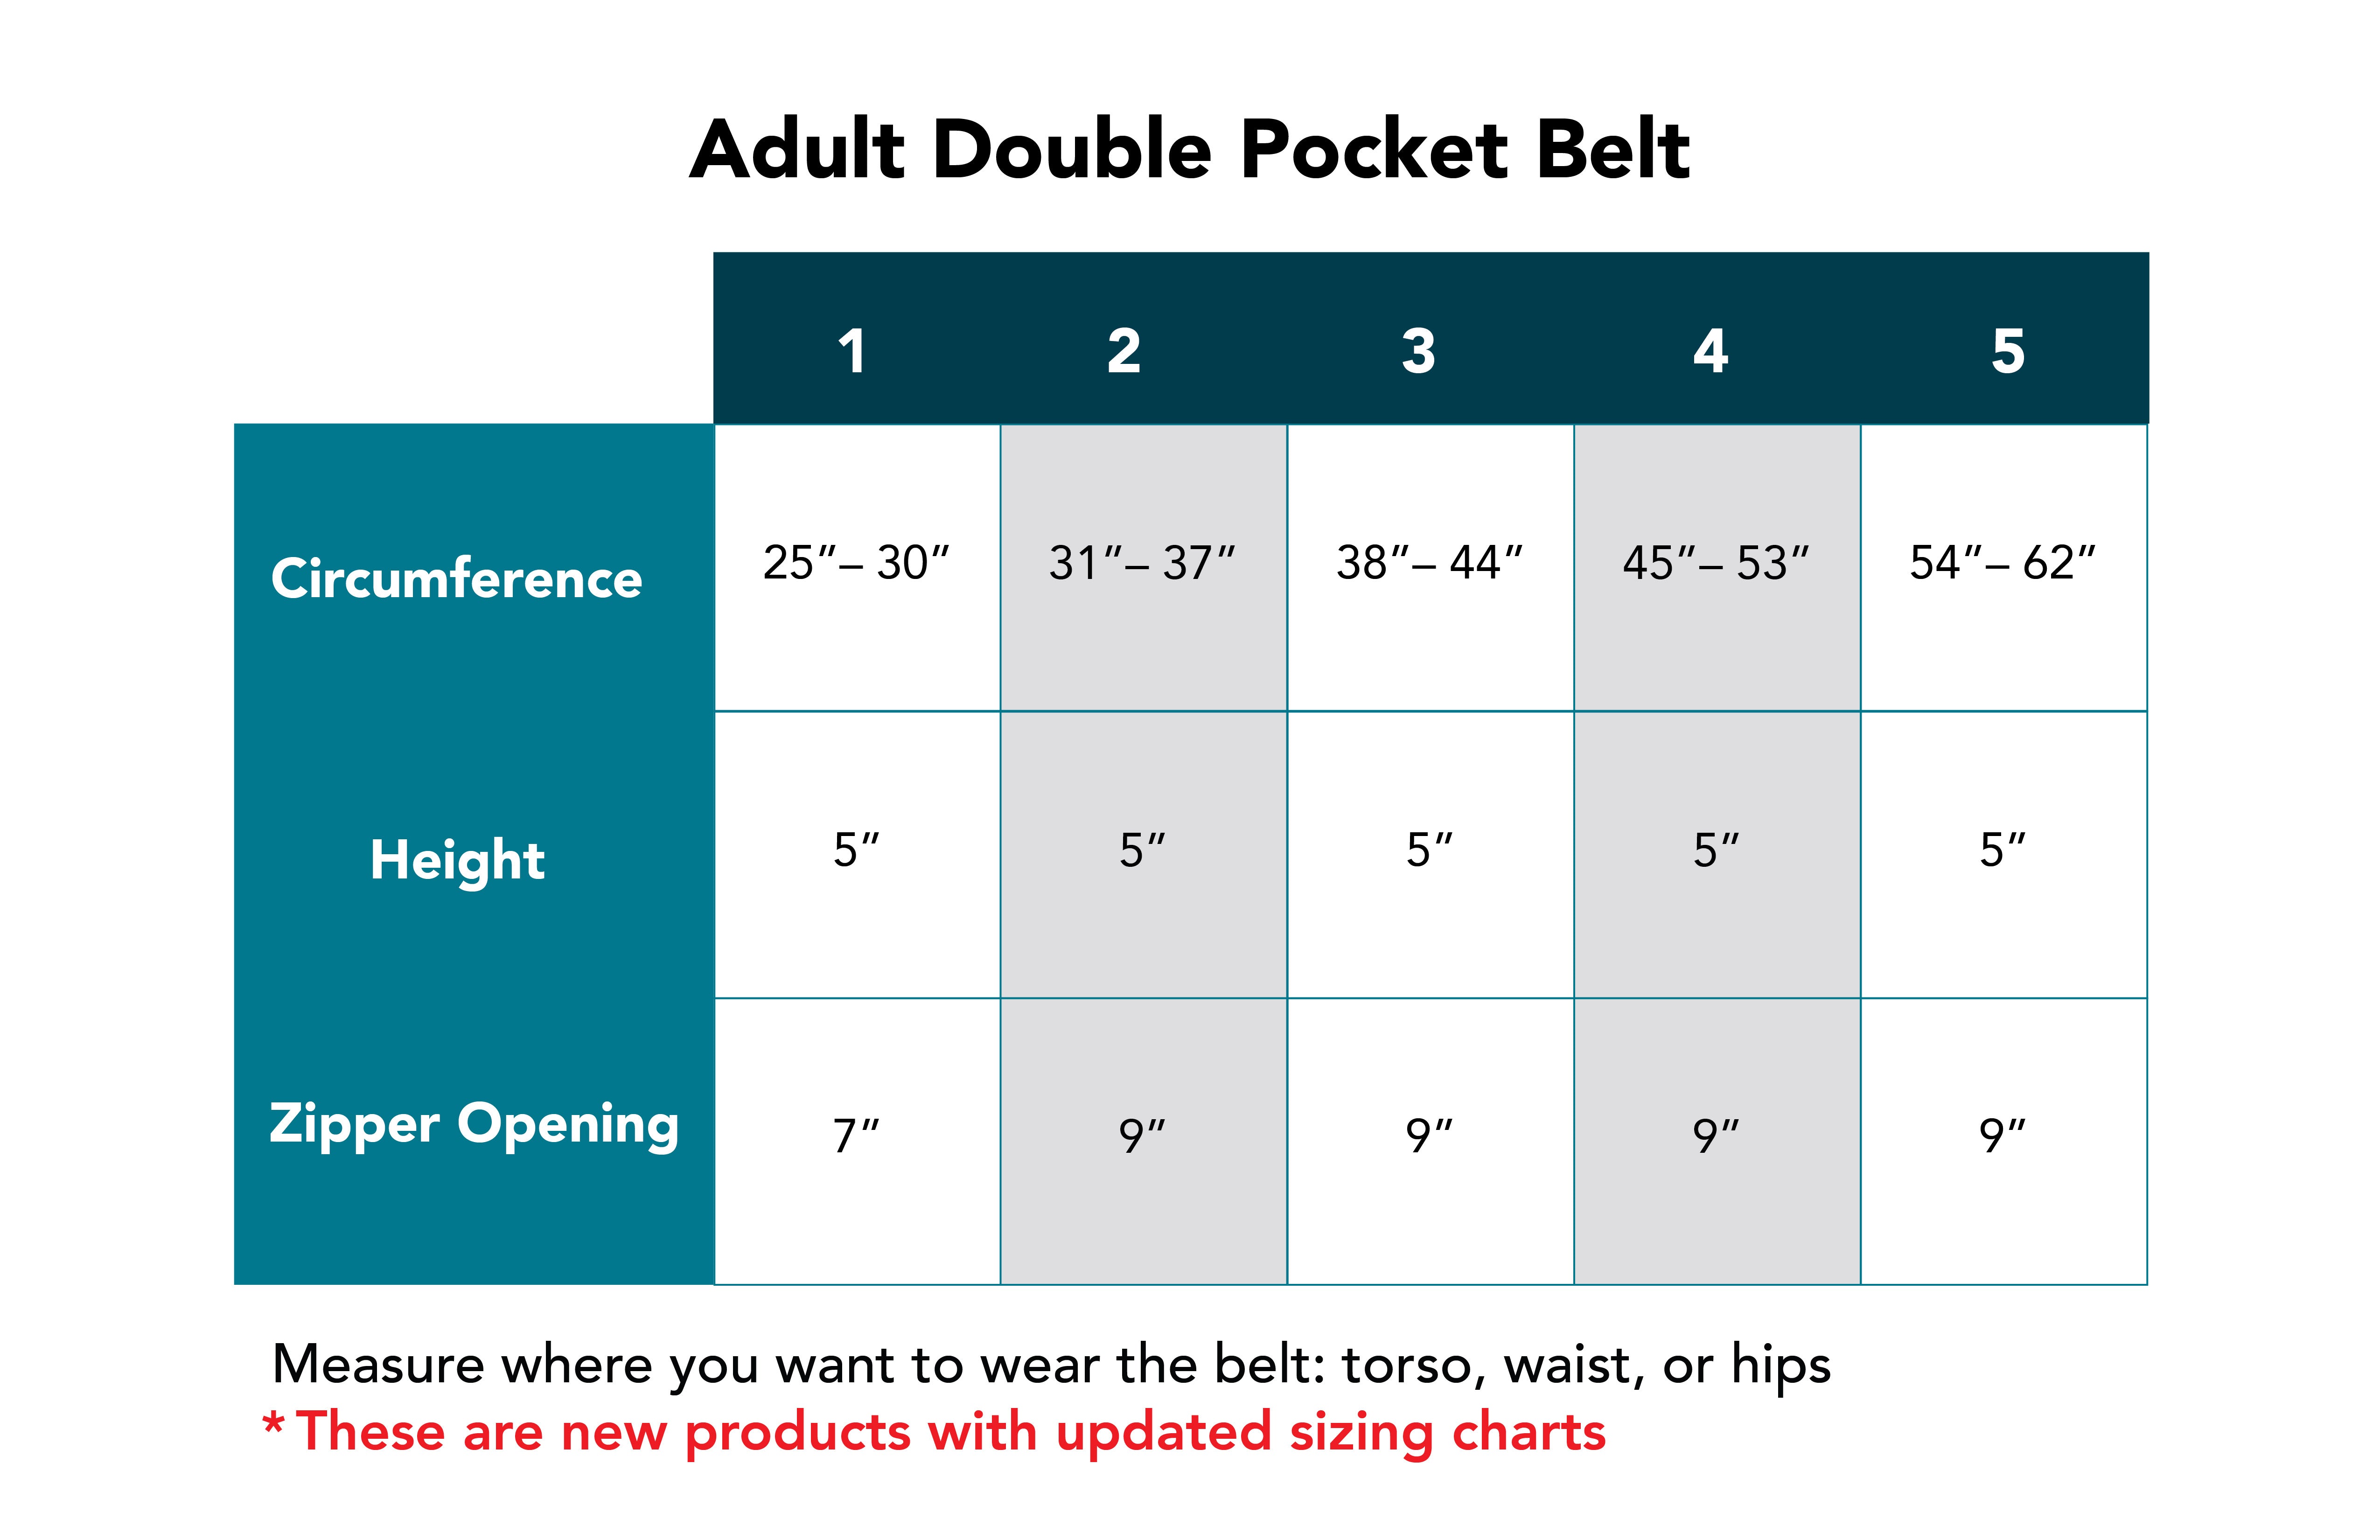 Toffee Double Pocket Belt carries T1D Insulin Pump, Glucose Monitor, Smartphone, Accessories, Epipen, Medical Devices